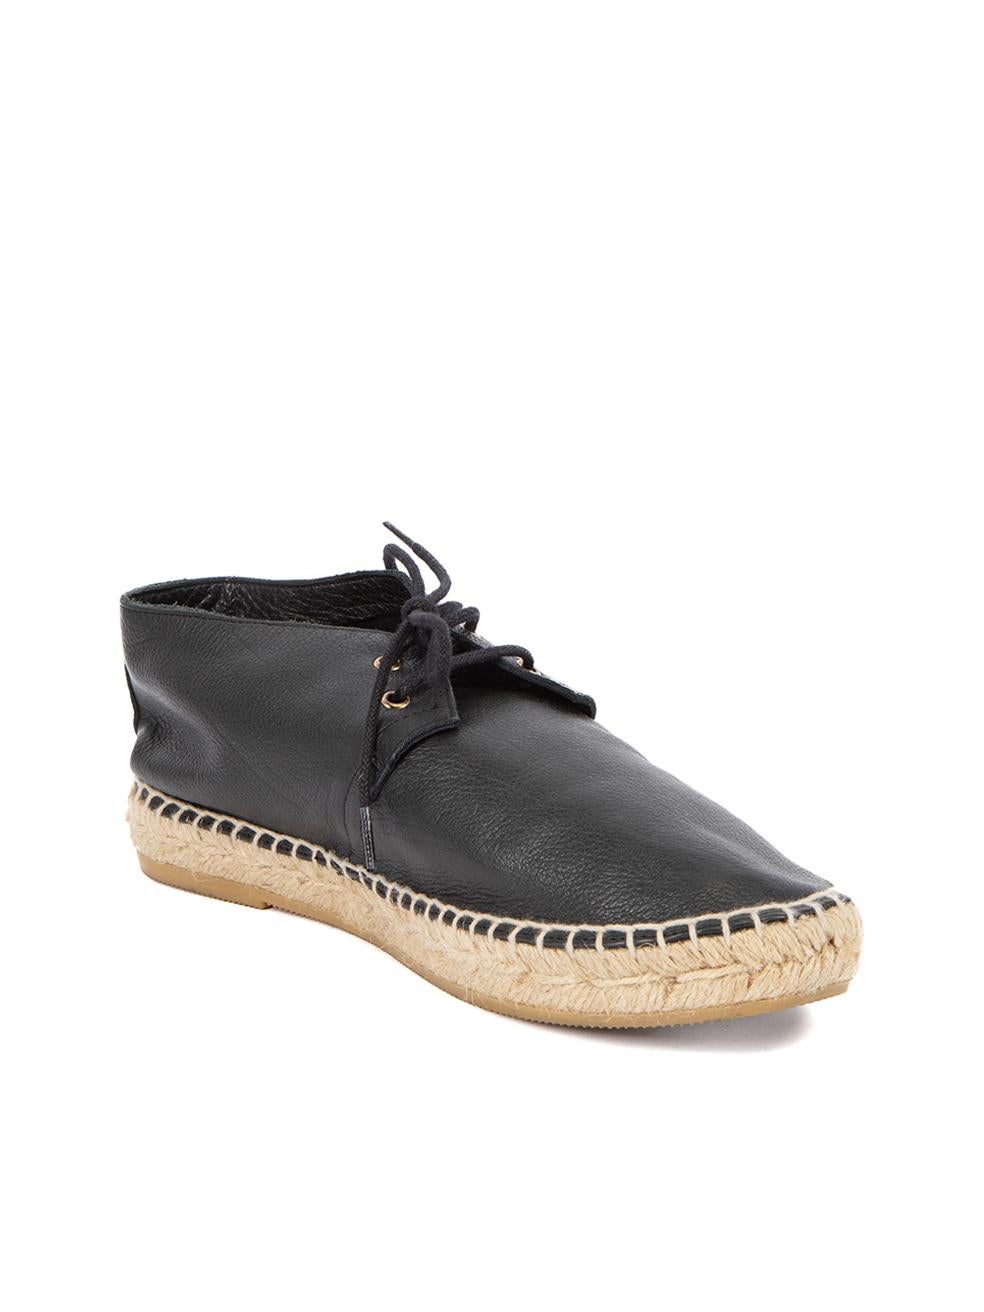 CONDITION is Very good. Minimal wear to espadrilles is evident. Minimal wear to the outsole and creasing to the leather exterior on this used Robert Clergerie designer resale item. This item comes with original dustbag.  Details  Black Leather